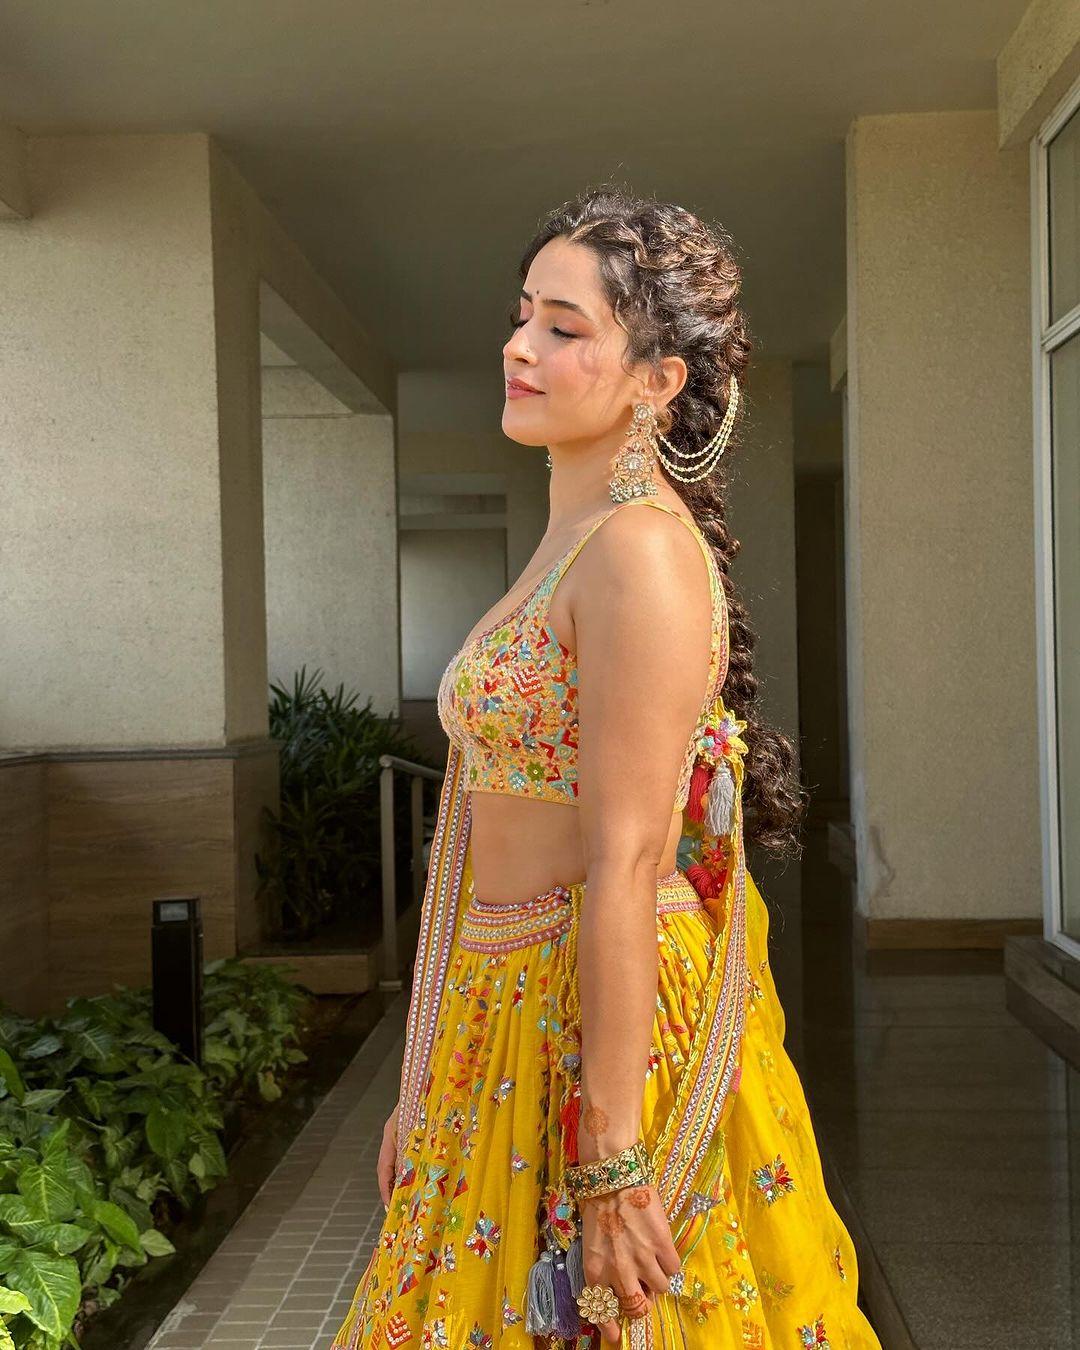 Sanya Malhotra posted pictures in this resplendent yellow lehenga that would be perfect for the Haldi ceremony at any wedding